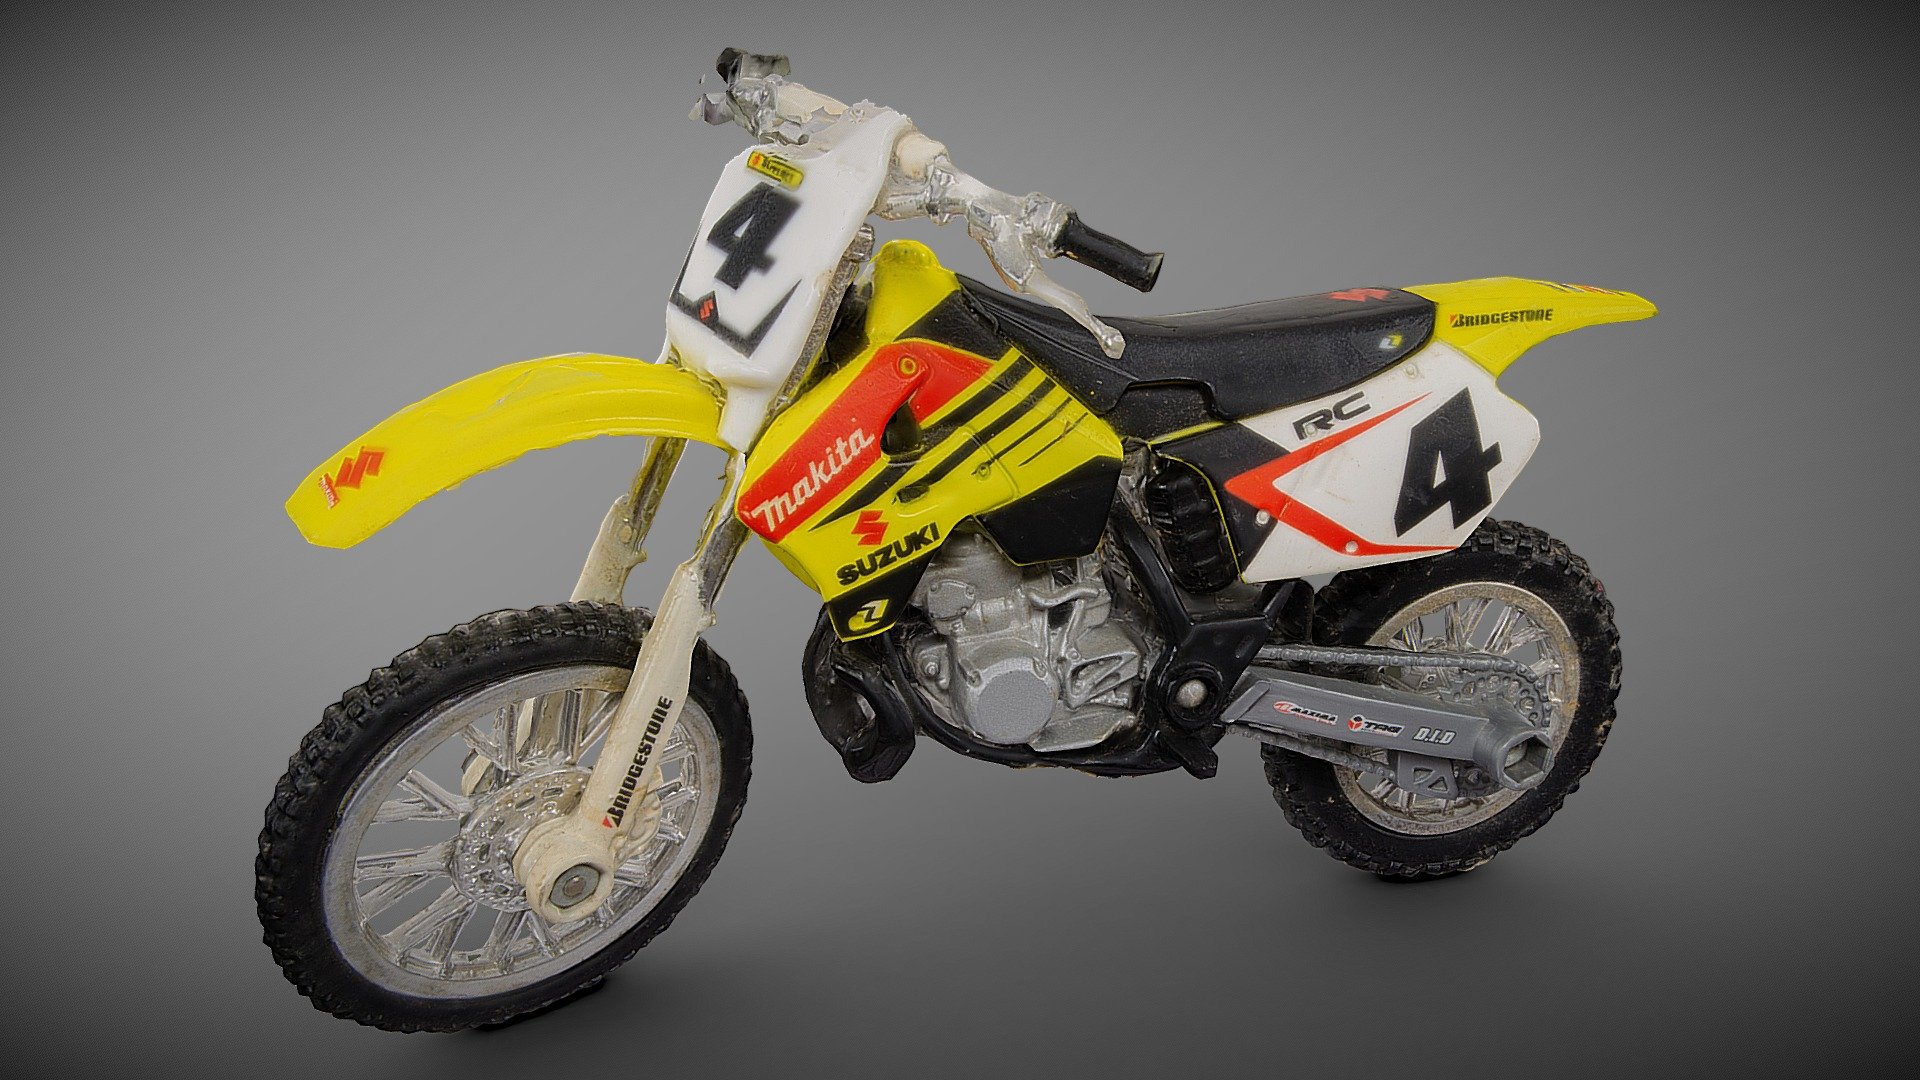 2005 marked the last time that a two-stroker won an AMA Supercross championship, and the feat was accomplished by Ricky Carmichael on a Team Makita Suzuki. To commemorate the feat, Suzuki announced a limited edition model for the following year 3d model